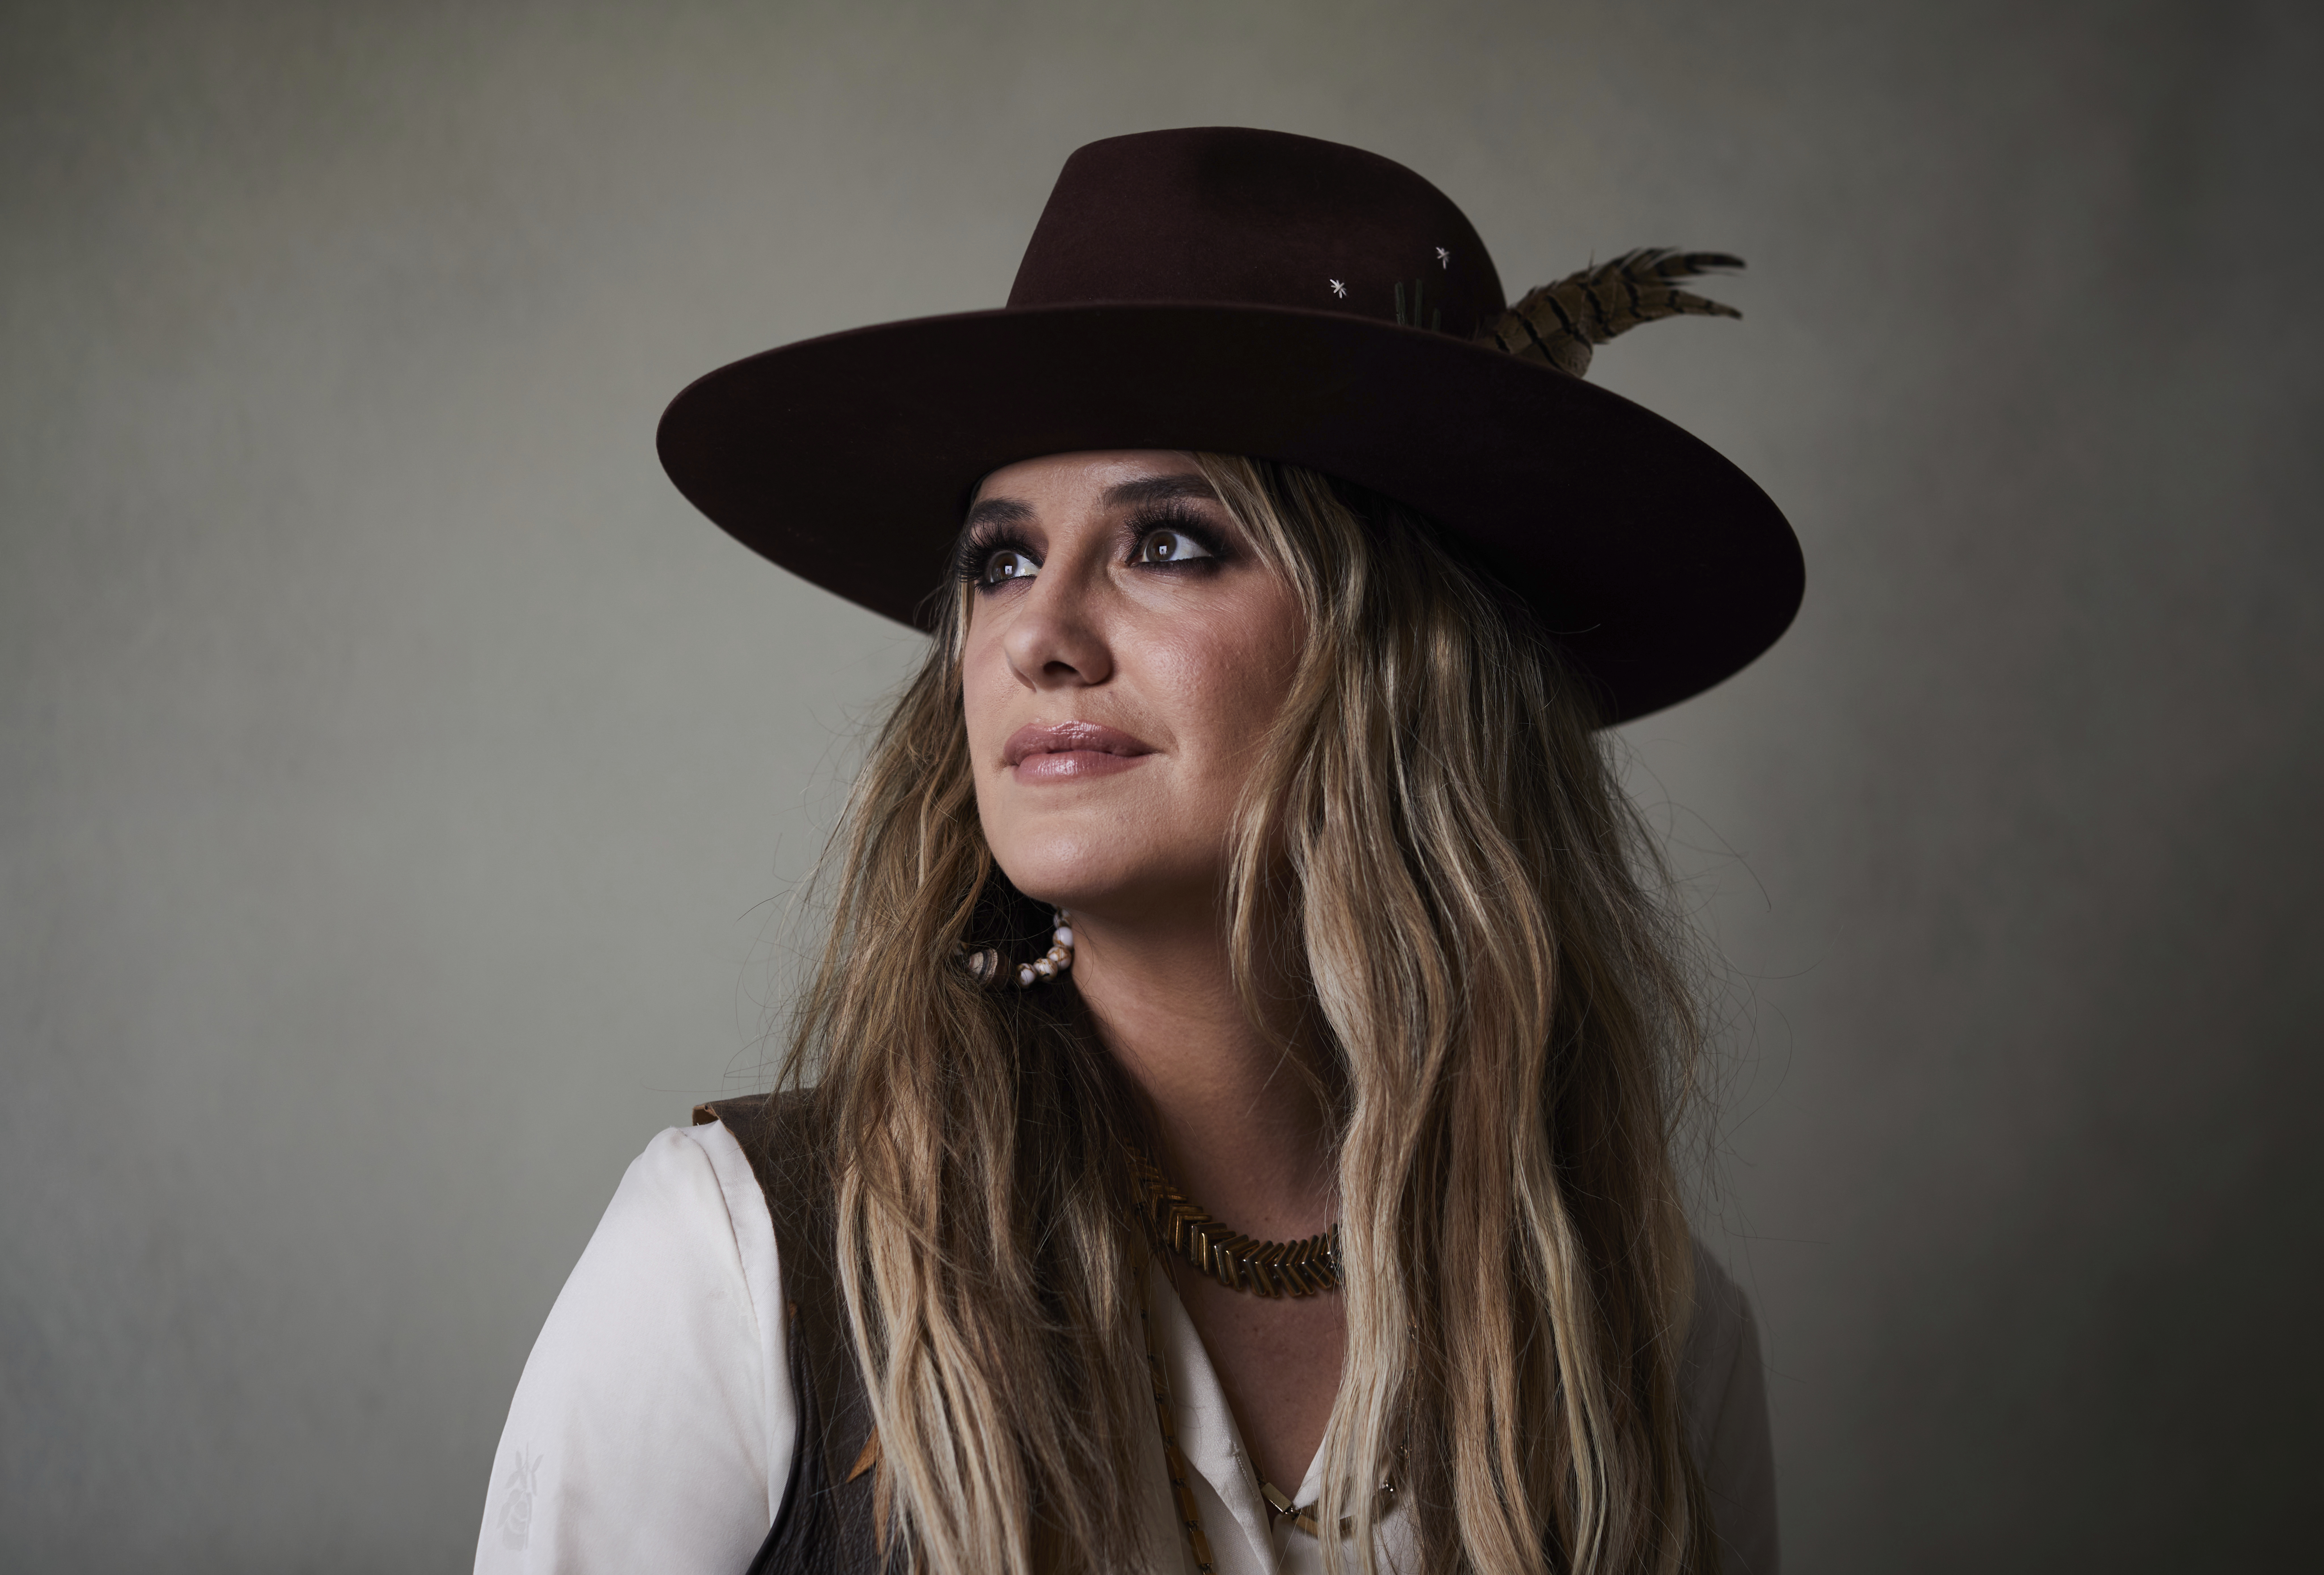 Lainey Wilson leads CMA Awards nominations in her 1st year  FOX40